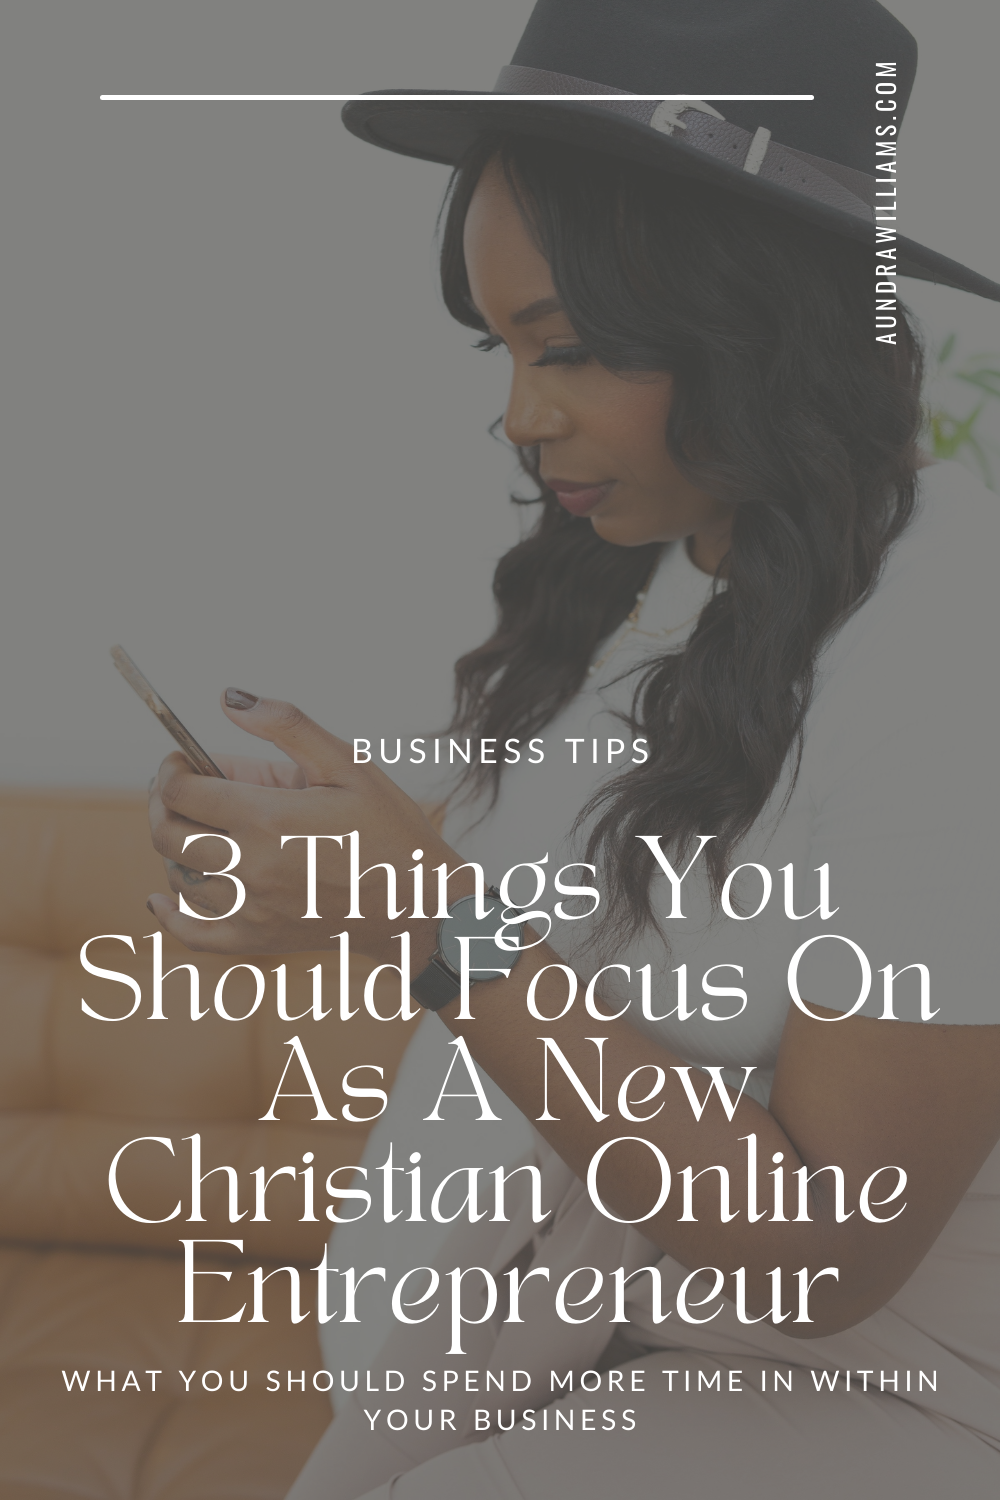 3 Things You Should Focus On As A New Christian Online Entrepreneur